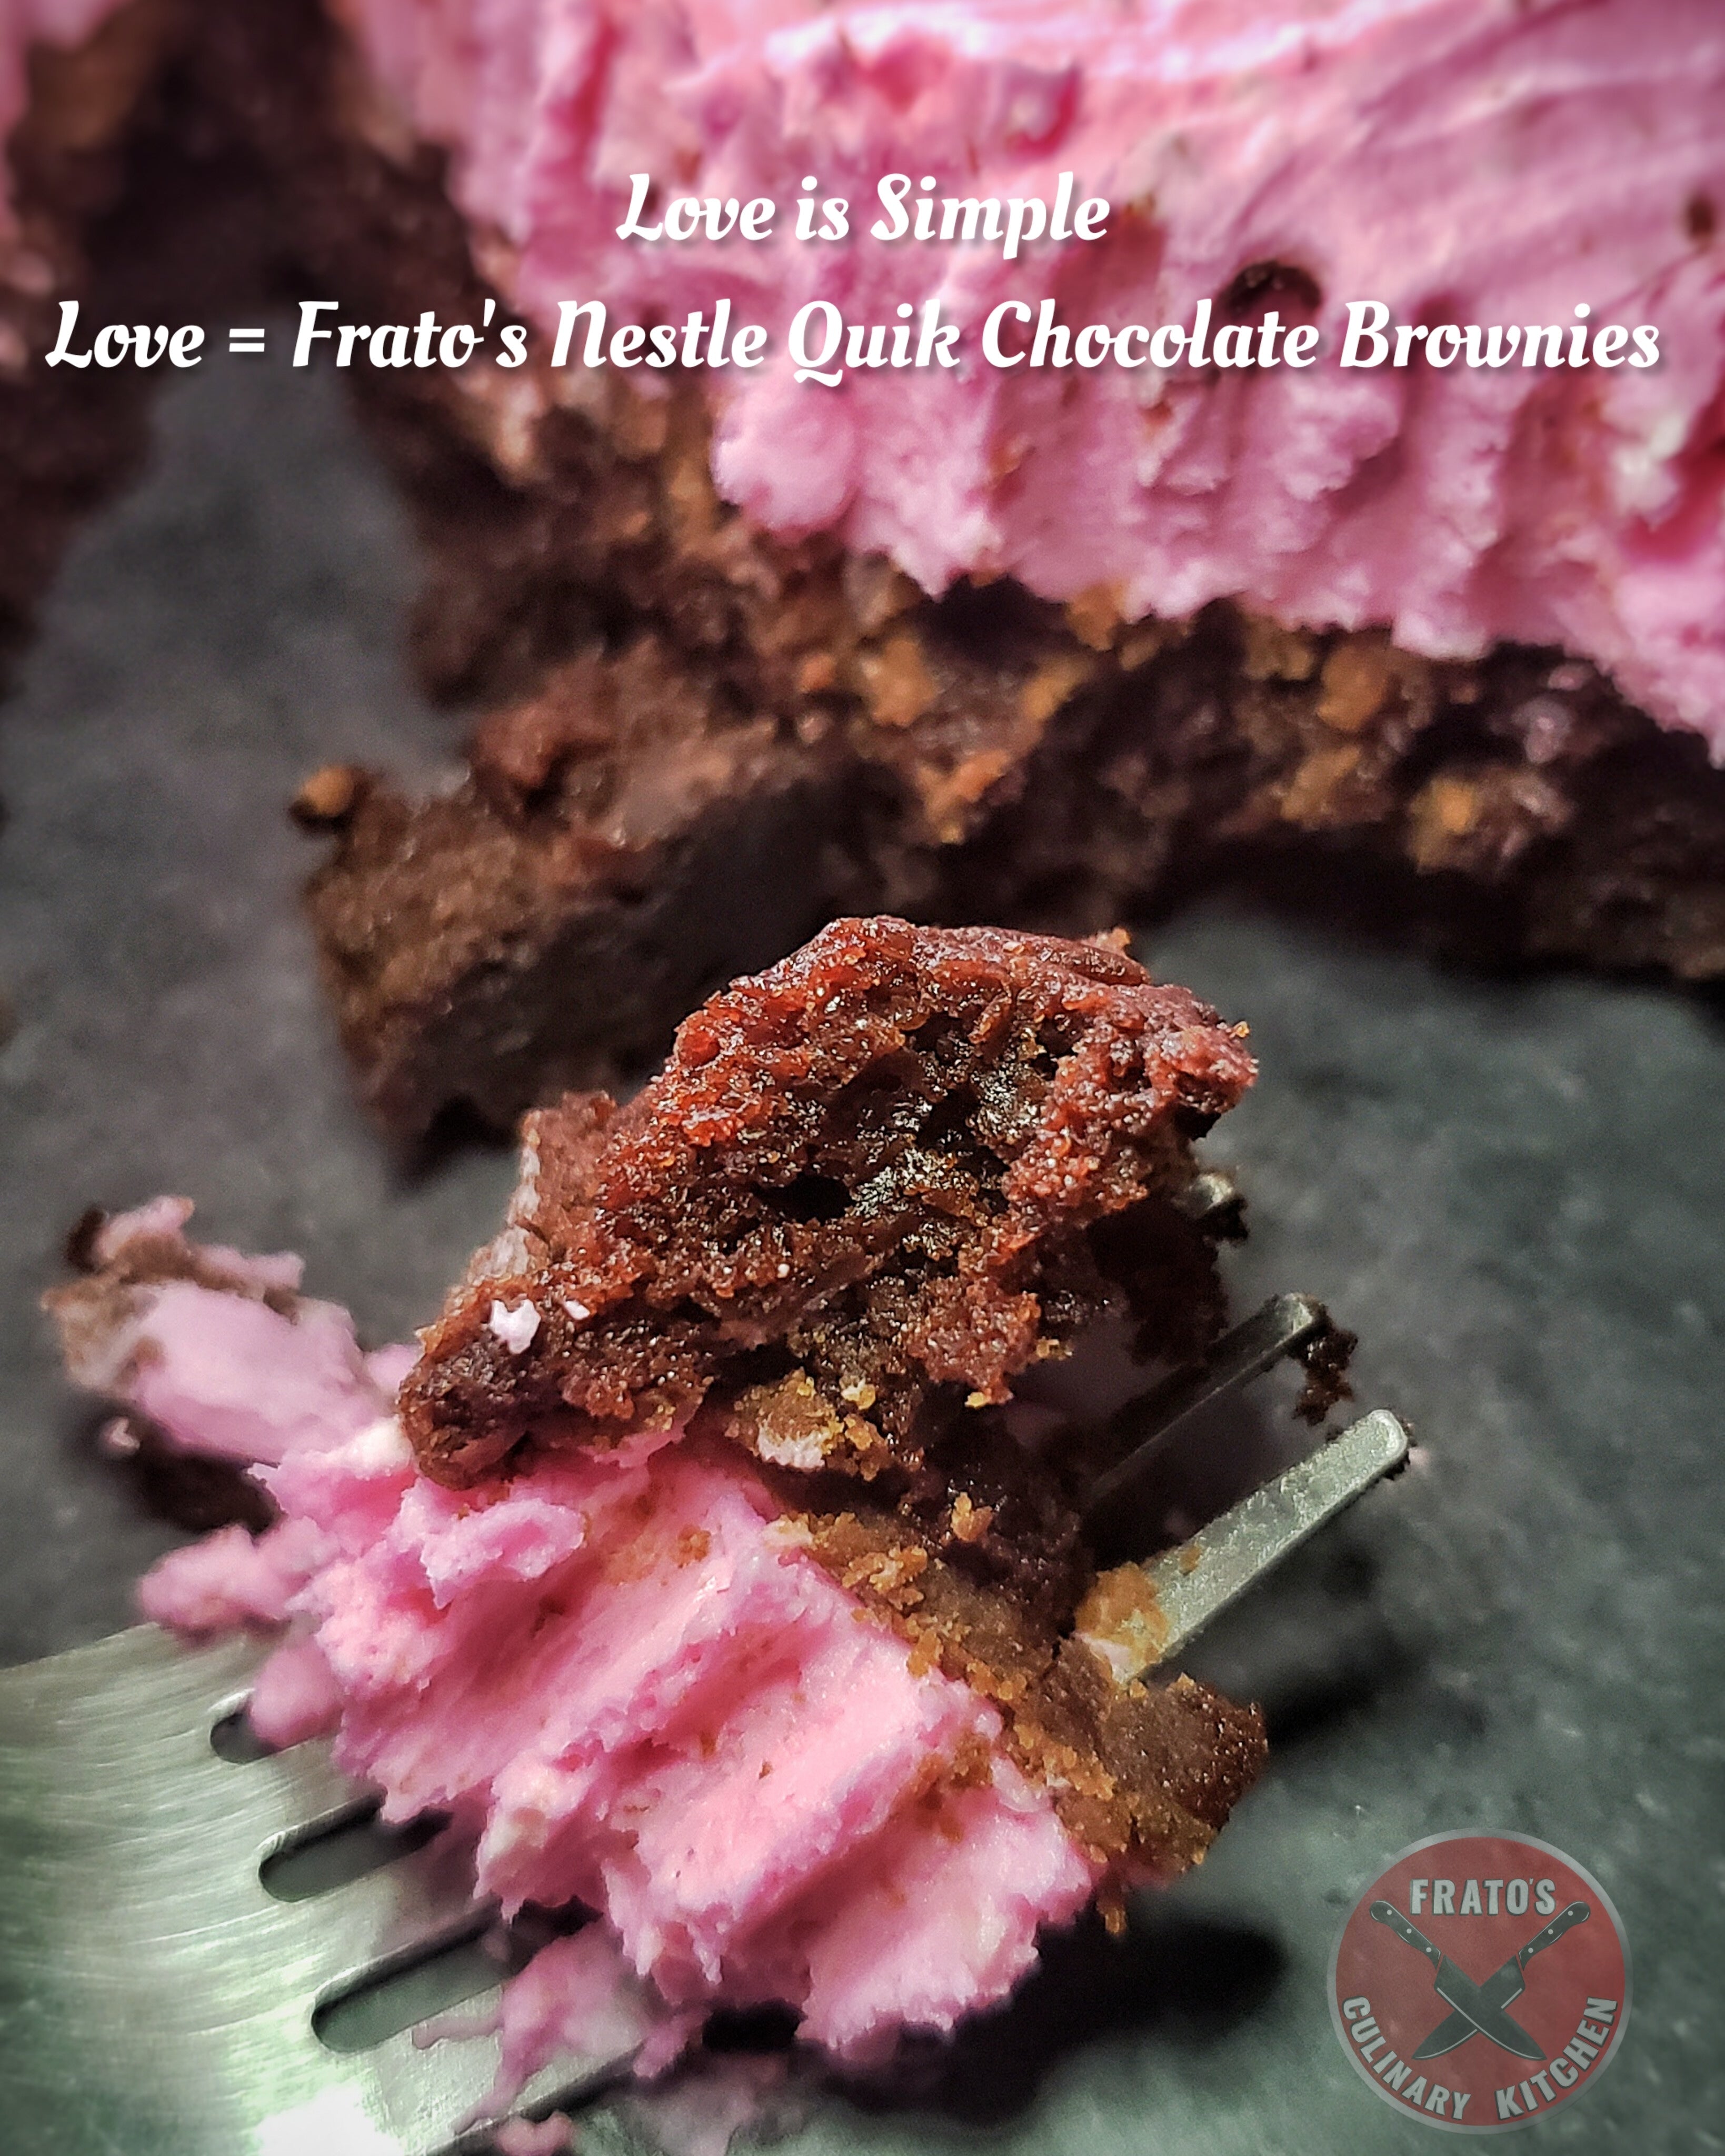 SOLD OUT: VALENTINE'S DAY BROWNIES! 2 POUNDS OF NESTLE QUIK STRAWBERRY BUTTERCREAM CHOCOLATE BROWNIES